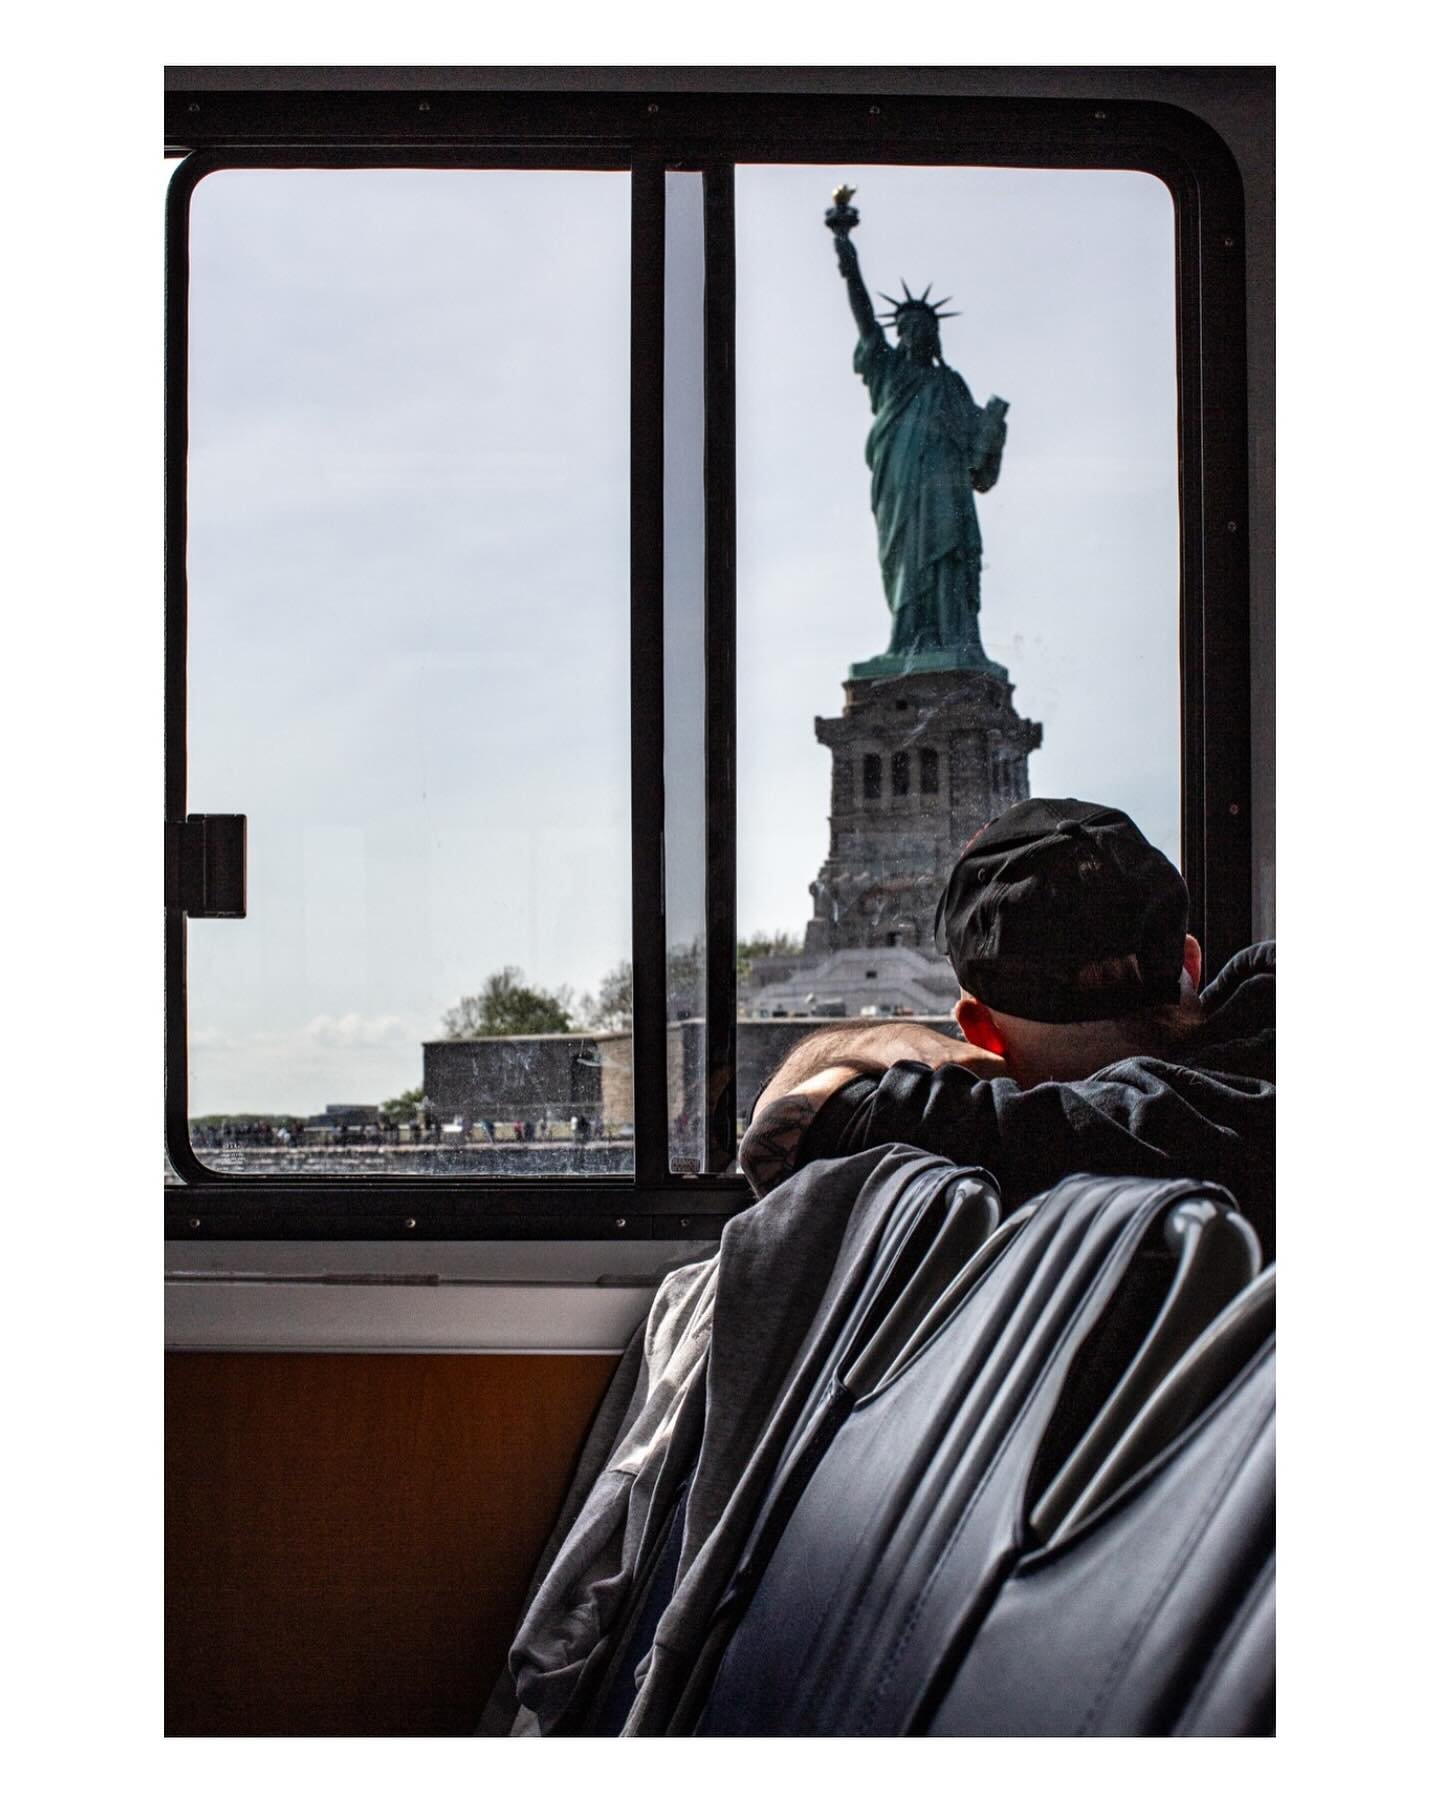 Last week I spent 5 days walking the streets of Manhattan making work. I took a break from walking to experience the city from a boat cruising the Upper New York Bay. 

Seeing the Statue of Liberty in all its glory last week through the eyes of touri